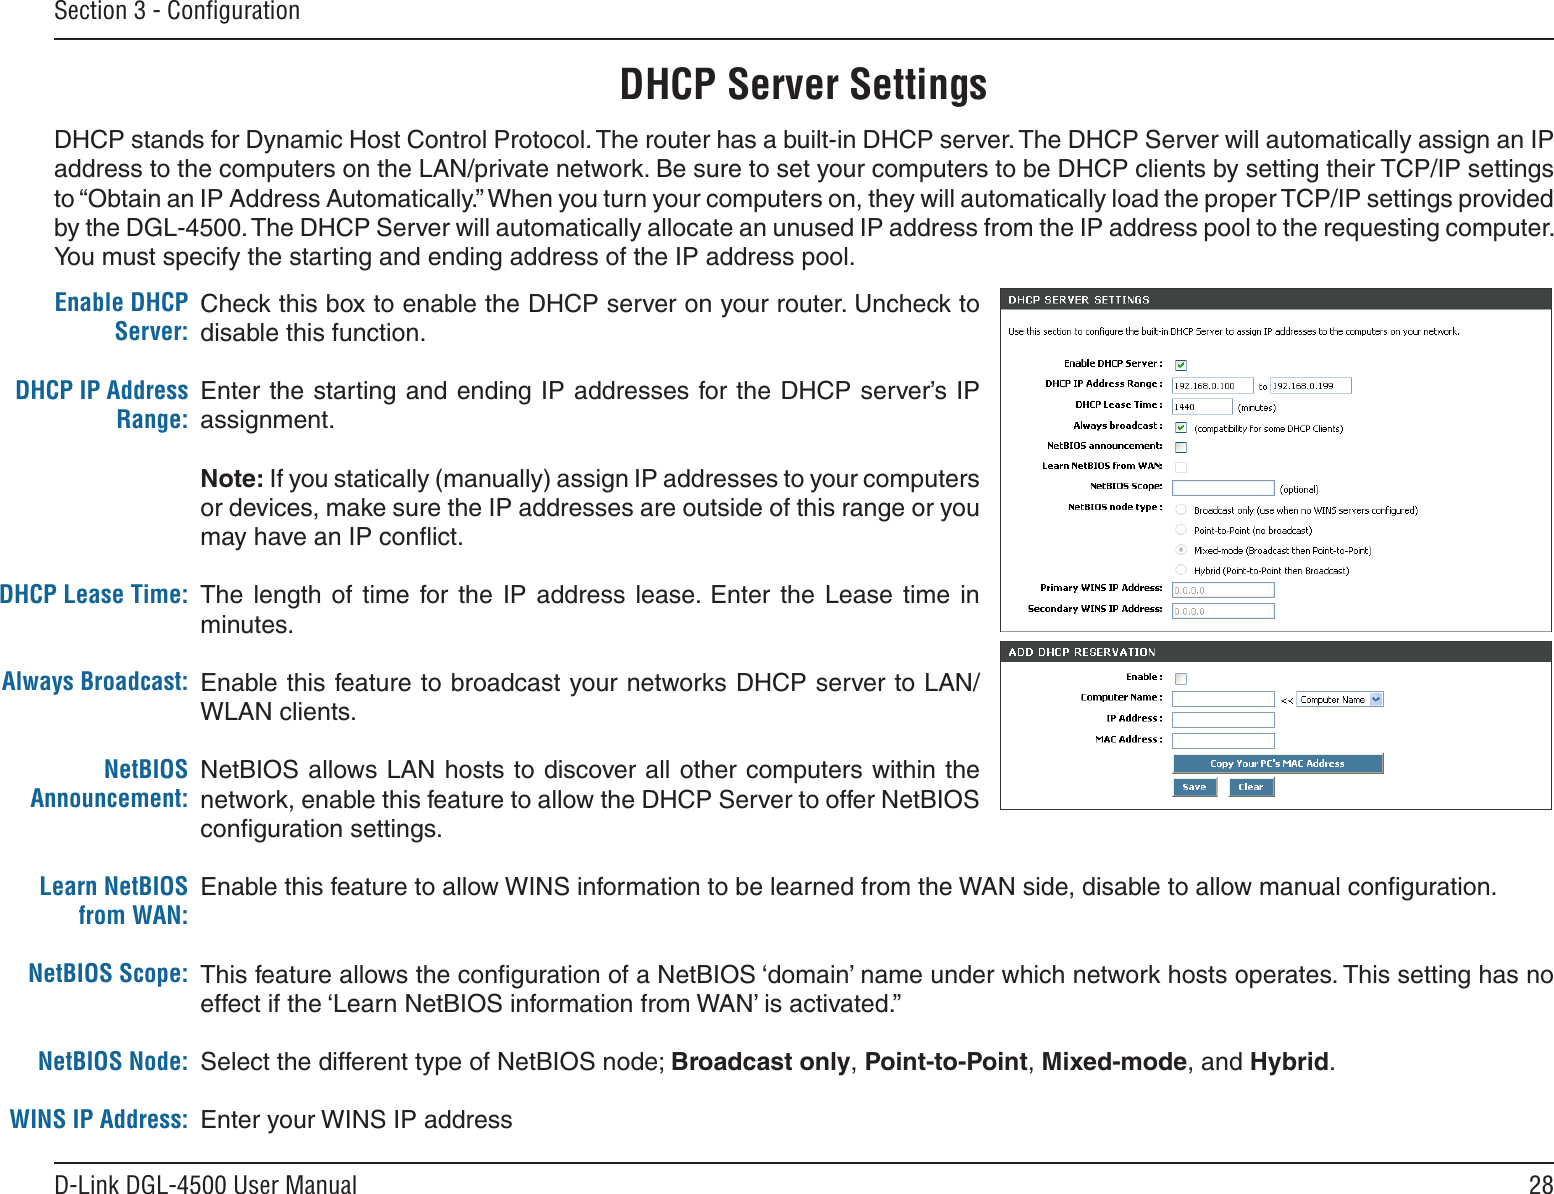 28D-Link DGL-4500 User ManualSection 3 - ConﬁgurationCheck this box to enable the DHCP server on your router. Uncheck to disable this function.Enter the starting and ending IP addresses for the DHCP server’s IP assignment.Note: If you statically (manually) assign IP addresses to your computers or devices, make sure the IP addresses are outside of this range or you may have an IP conﬂict. The  length  of  time  for the  IP  address  lease.  Enter  the  Lease  time  in minutes.Enable this feature to broadcast your networks DHCP server to LAN/WLAN clients.NetBIOS allows LAN hosts to discover all other computers within the network, enable this feature to allow the DHCP Server to offer NetBIOS conﬁguration settings.Enable this feature to allow WINS information to be learned from the WAN side, disable to allow manual conﬁguration.This feature allows the conﬁguration of a NetBIOS ‘domain’ name under which network hosts operates. This setting has no effect if the ‘Learn NetBIOS information from WAN’ is activated.”Select the different type of NetBIOS node; Broadcast only, Point-to-Point, Mixed-mode, and Hybrid.Enter your WINS IP addressEnable DHCP Server:DHCP IP Address Range:DHCP Lease Time:Always Broadcast:NetBIOS Announcement:Learn NetBIOS from WAN:NetBIOS Scope:NetBIOS Node:WINS IP Address:DHCP Server SettingsDHCP stands for Dynamic Host Control Protocol. The router has a built-in DHCP server. The DHCP Server will automatically assign an IP address to the computers on the LAN/private network. Be sure to set your computers to be DHCP clients by setting their TCP/IP settings to “Obtain an IP Address Automatically.” When you turn your computers on, they will automatically load the proper TCP/IP settings provided by the DGL-4500. The DHCP Server will automatically allocate an unused IP address from the IP address pool to the requesting computer. You must specify the starting and ending address of the IP address pool.